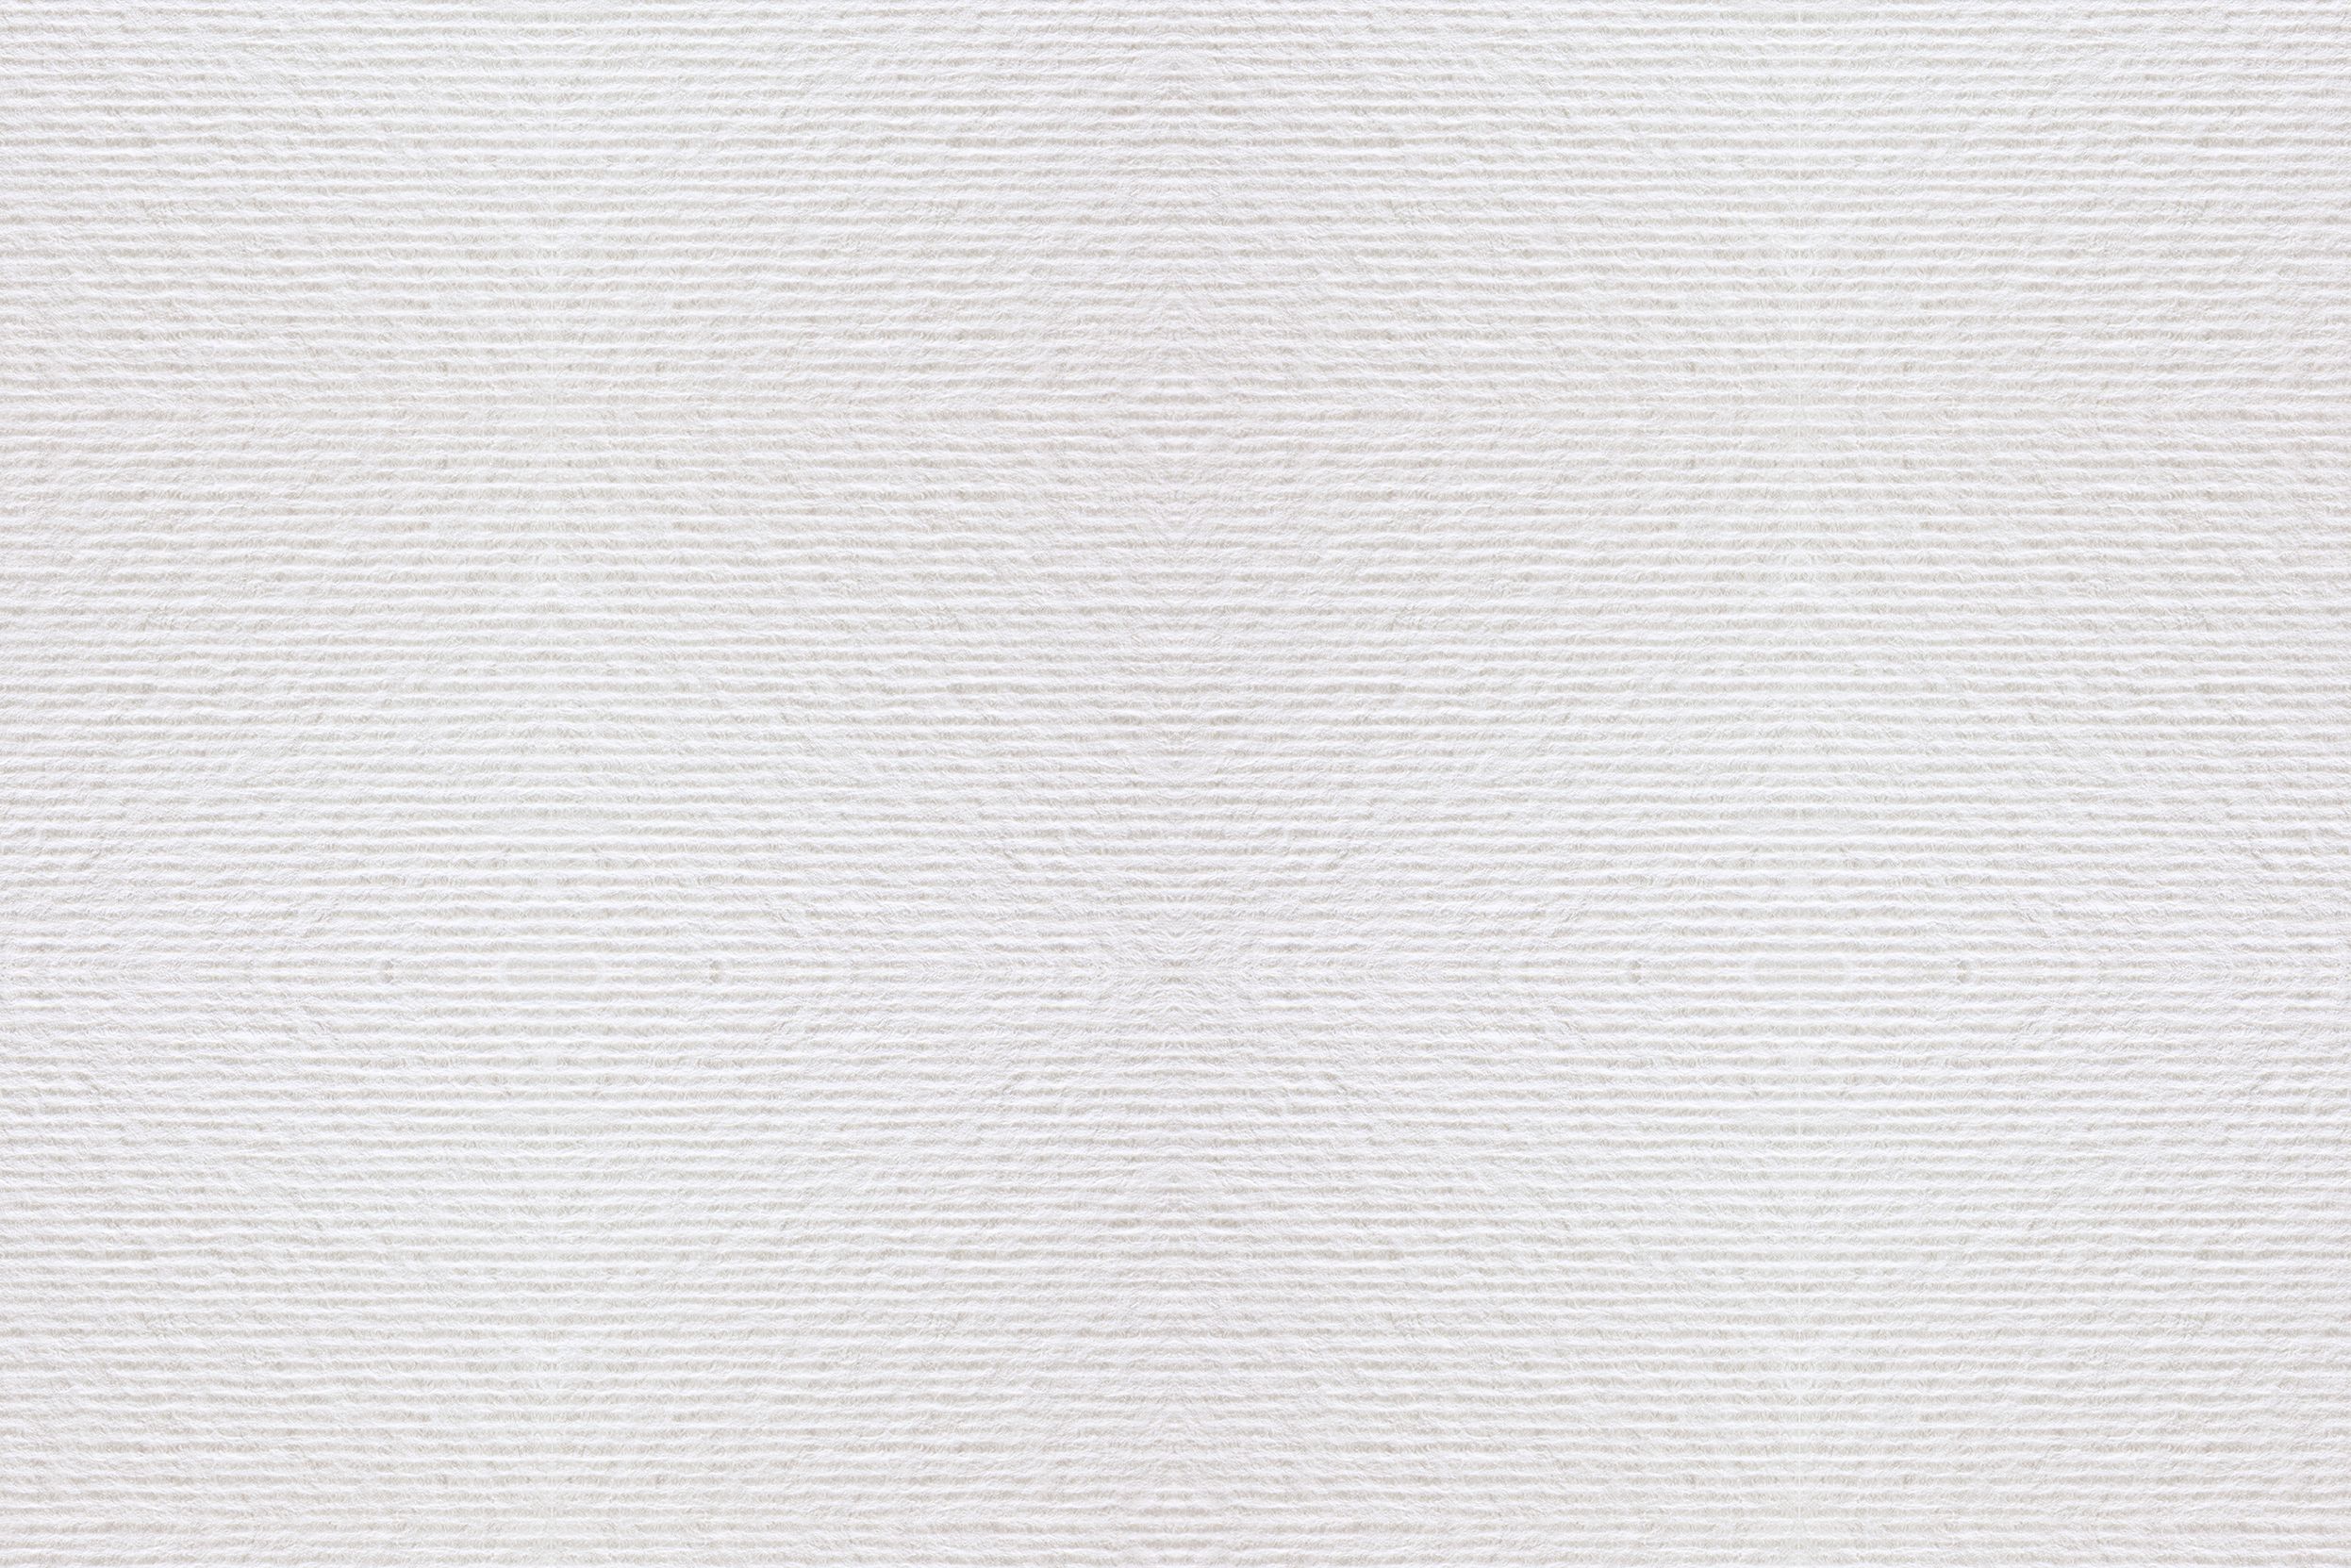 Acquerello White (no strip, square cut): Natural paper made of FSC certified pure cellulose. Surface embossed with parallel lines. Producer: Fedrigoni